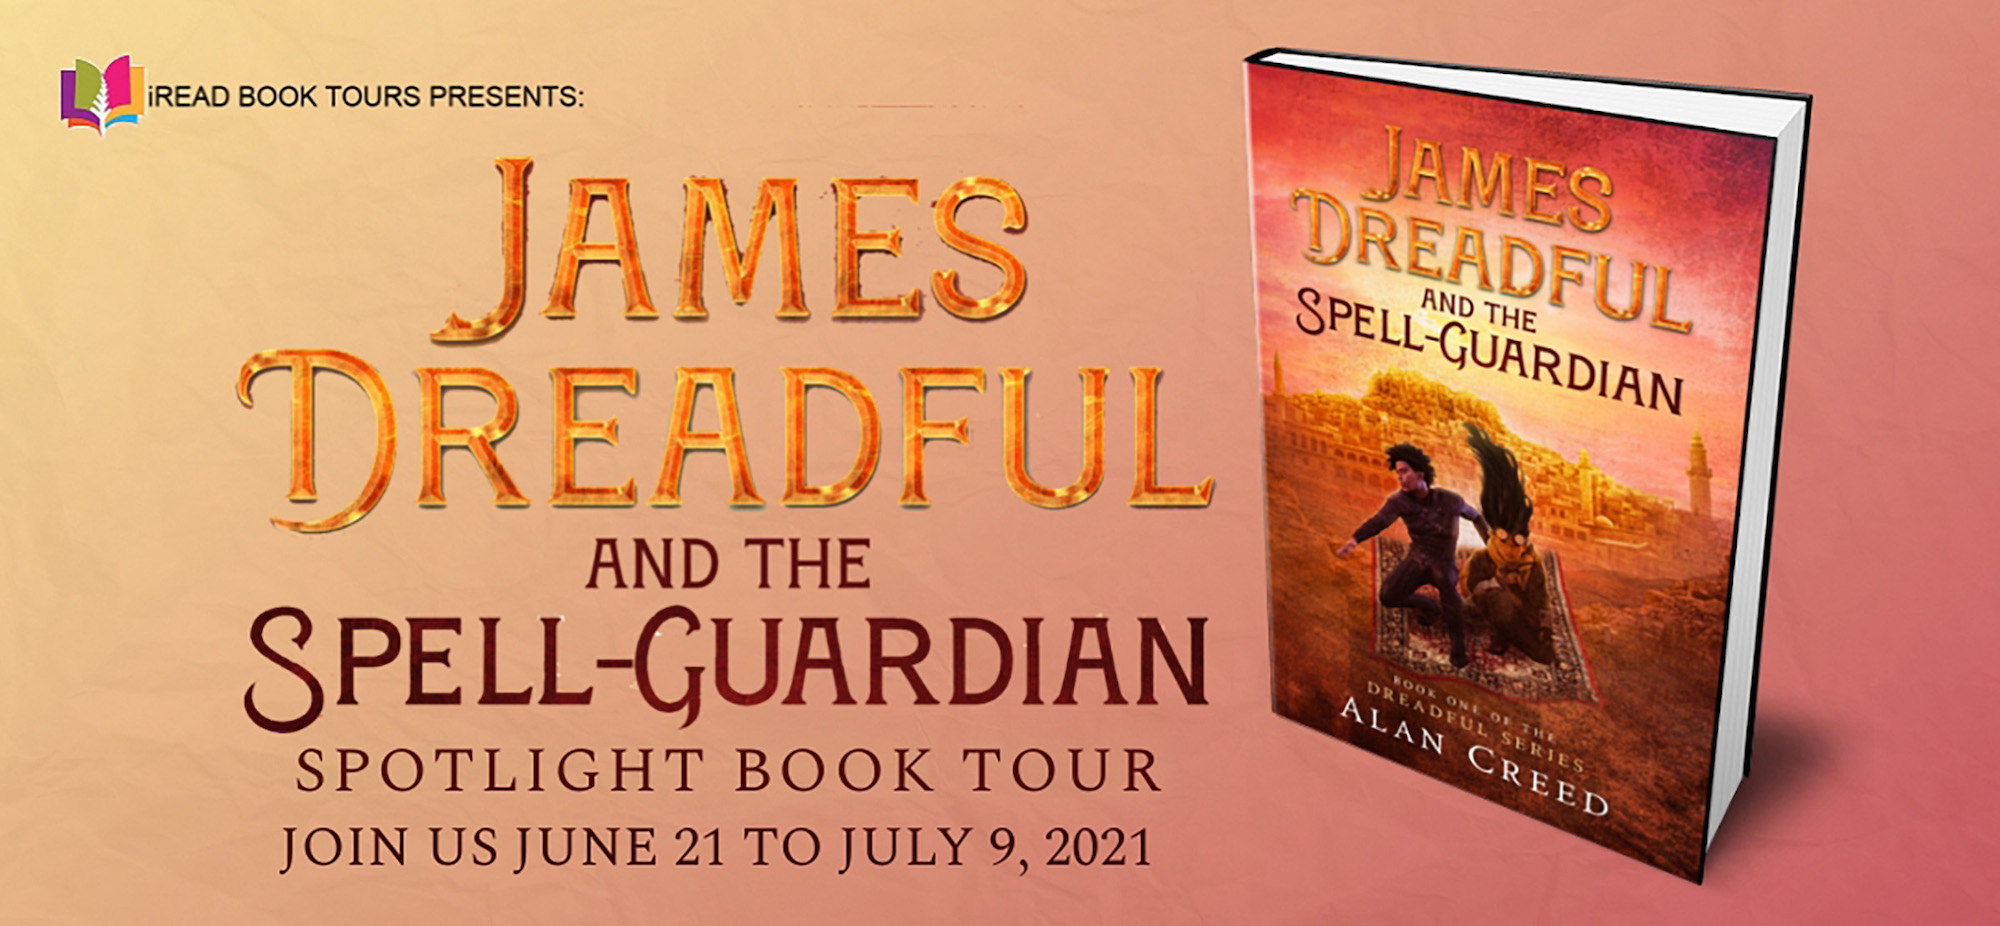 James Dreadful and the Spell-Guardian